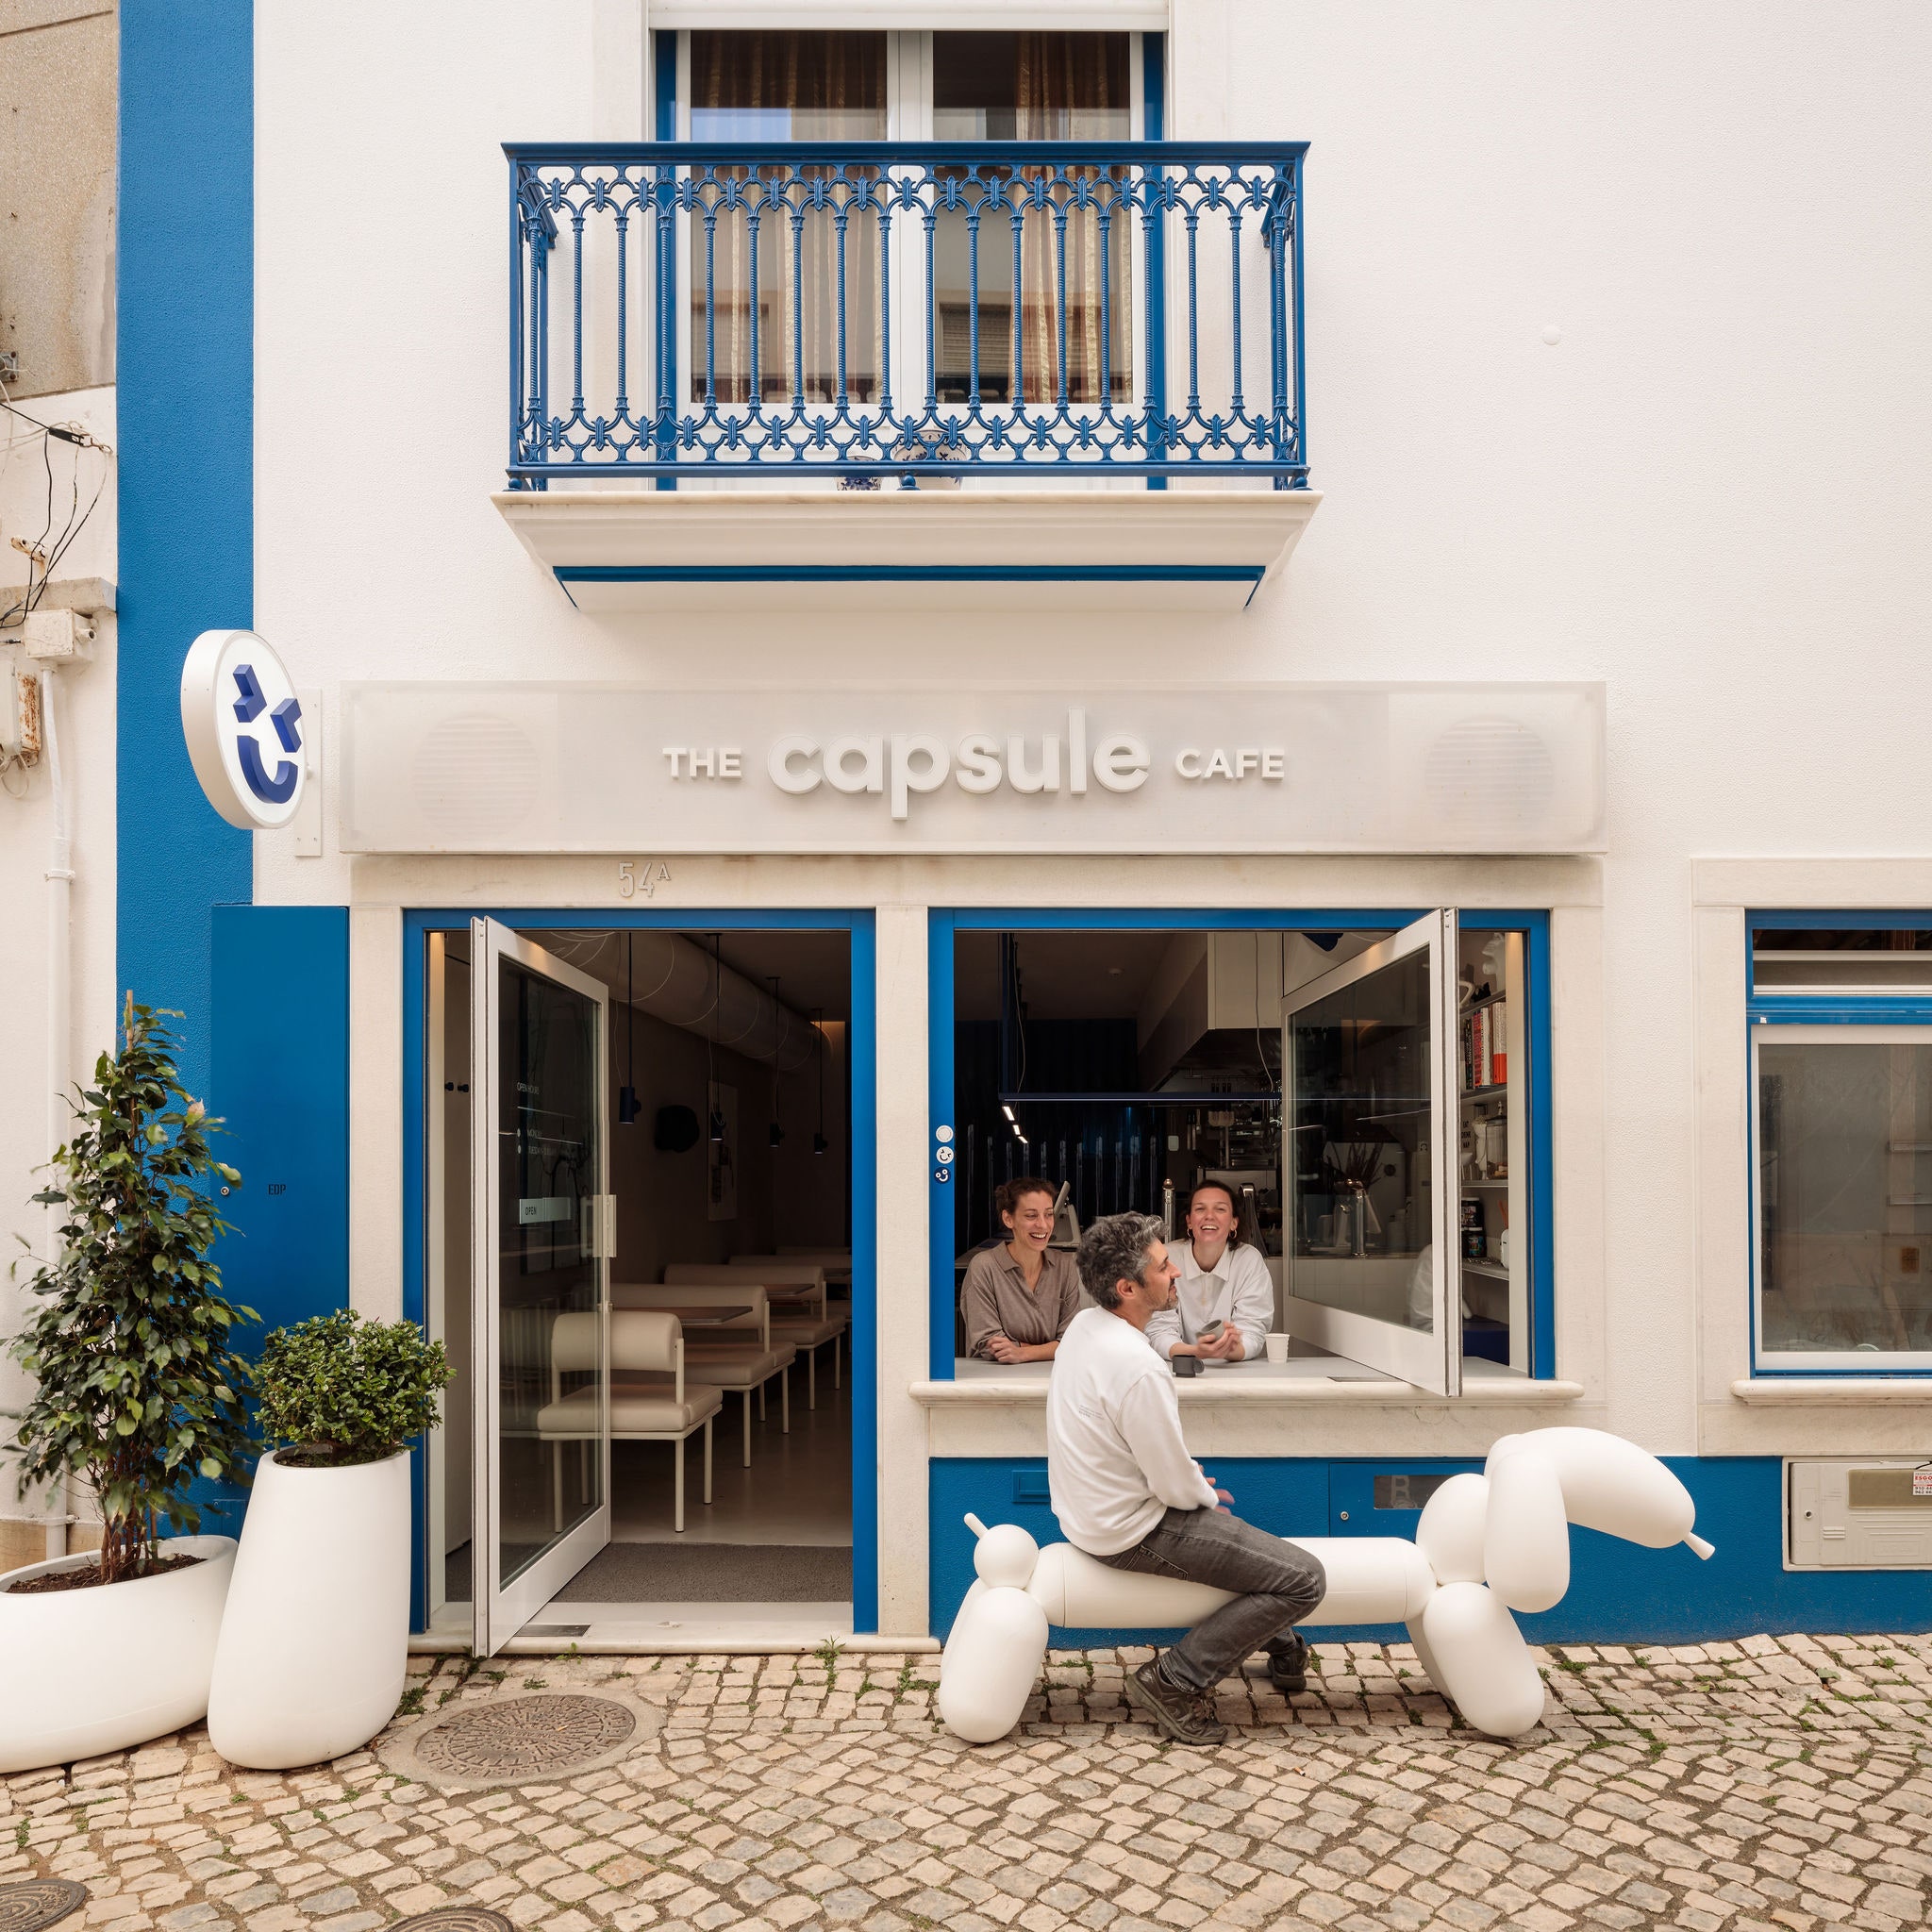 Atelier Réalité transformed a long commercial space into the Capsule Cafe, a unique coffee shop and restaurant in the fishing village of Ericeira, Portugal. The firm chose a blue-and-white palette as a nod to the sea, sky, and clouds, as well as the exteriors of local buildings. The plan of the narrow interior was inspired by a diner, with a sit-down counter along the open kitchen and a modern take on booths on the other side of the space. A bright blue plastic strip curtain conceals the bathroom and technical areas.<p>Sign up for our newsletter to get the latest in design, decorating, celebrity style, shopping, and more.</p><a href="https://www.architecturaldigest.com/newsletter/subscribe?sourceCode=msnsend">Sign Up Now</a>